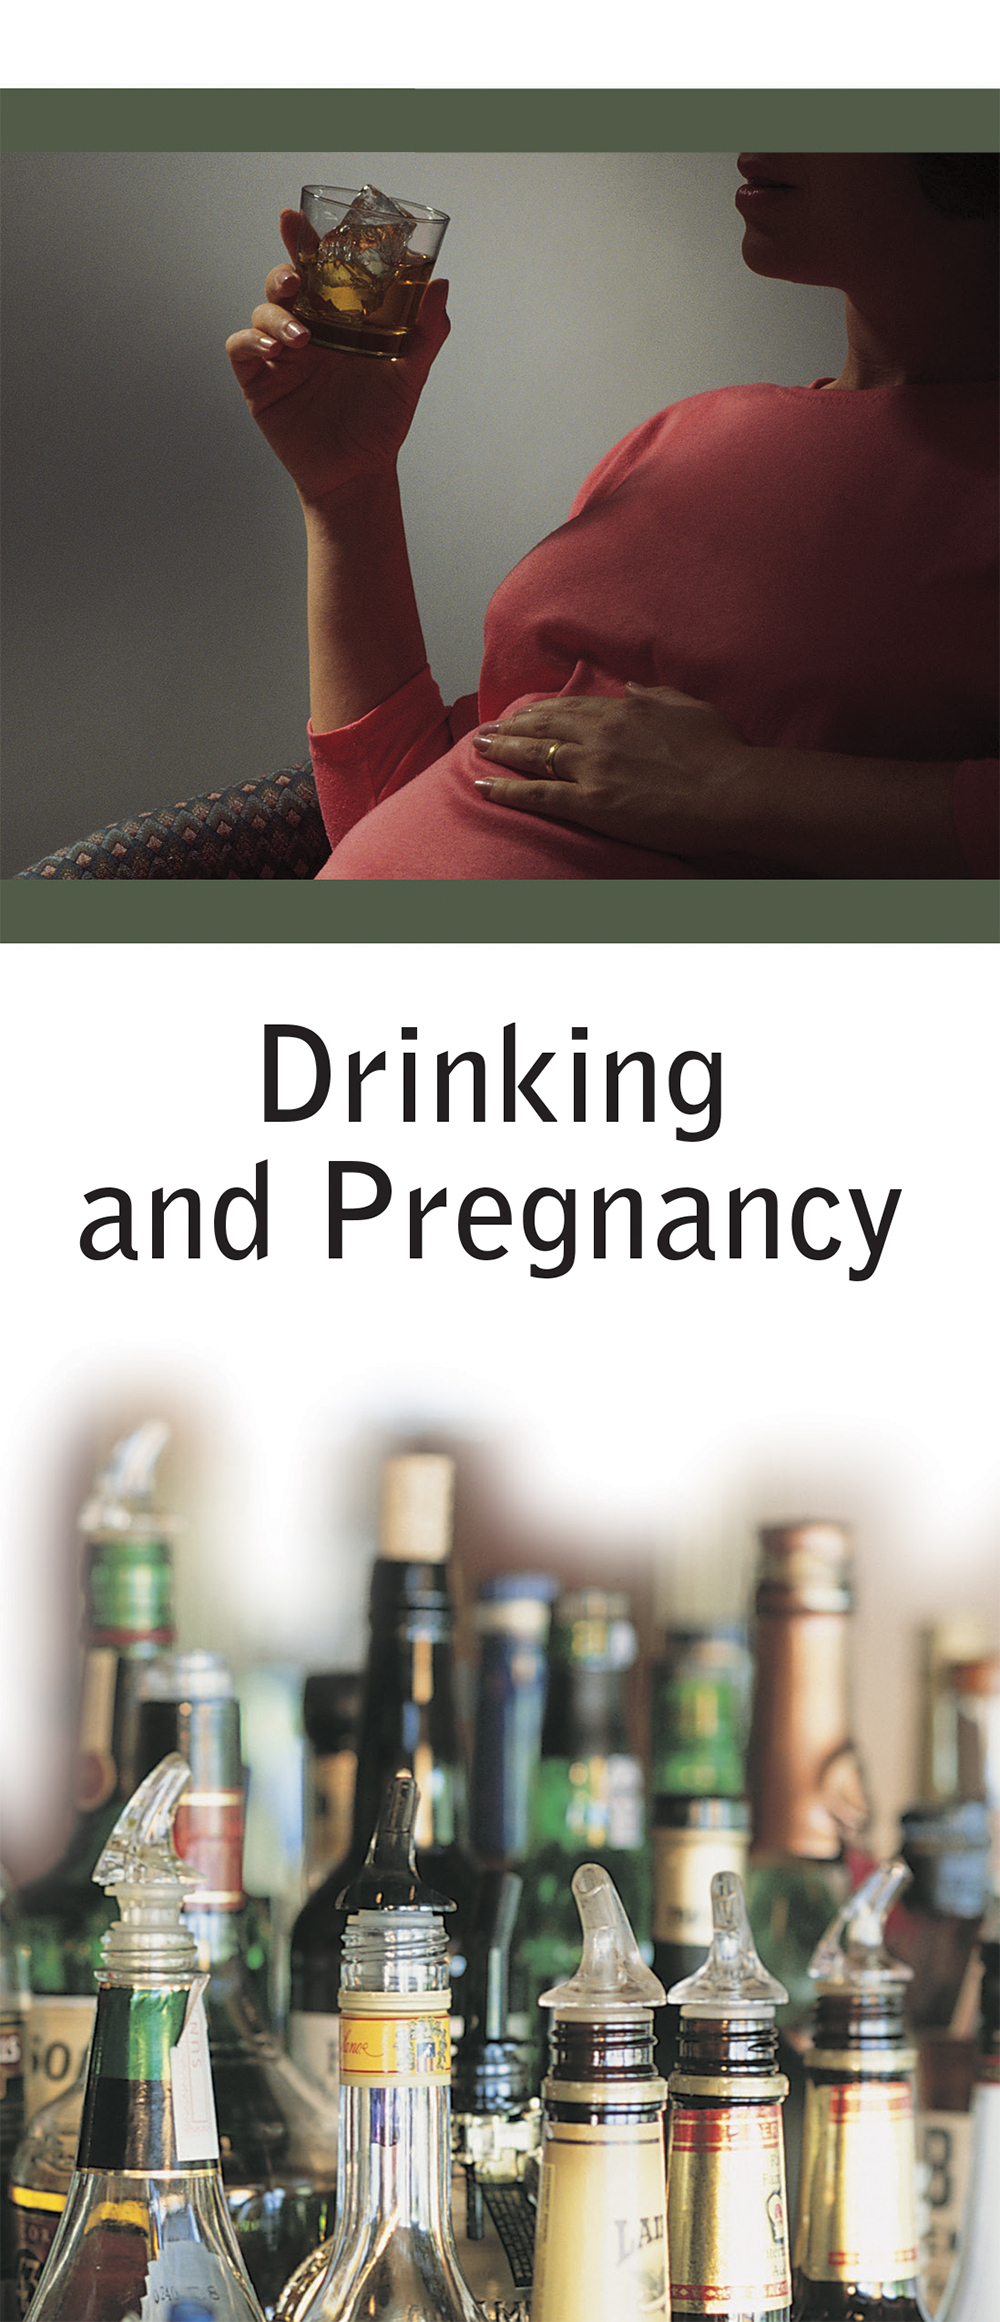 Literature, Drinking and Pregnancy: 50/pk